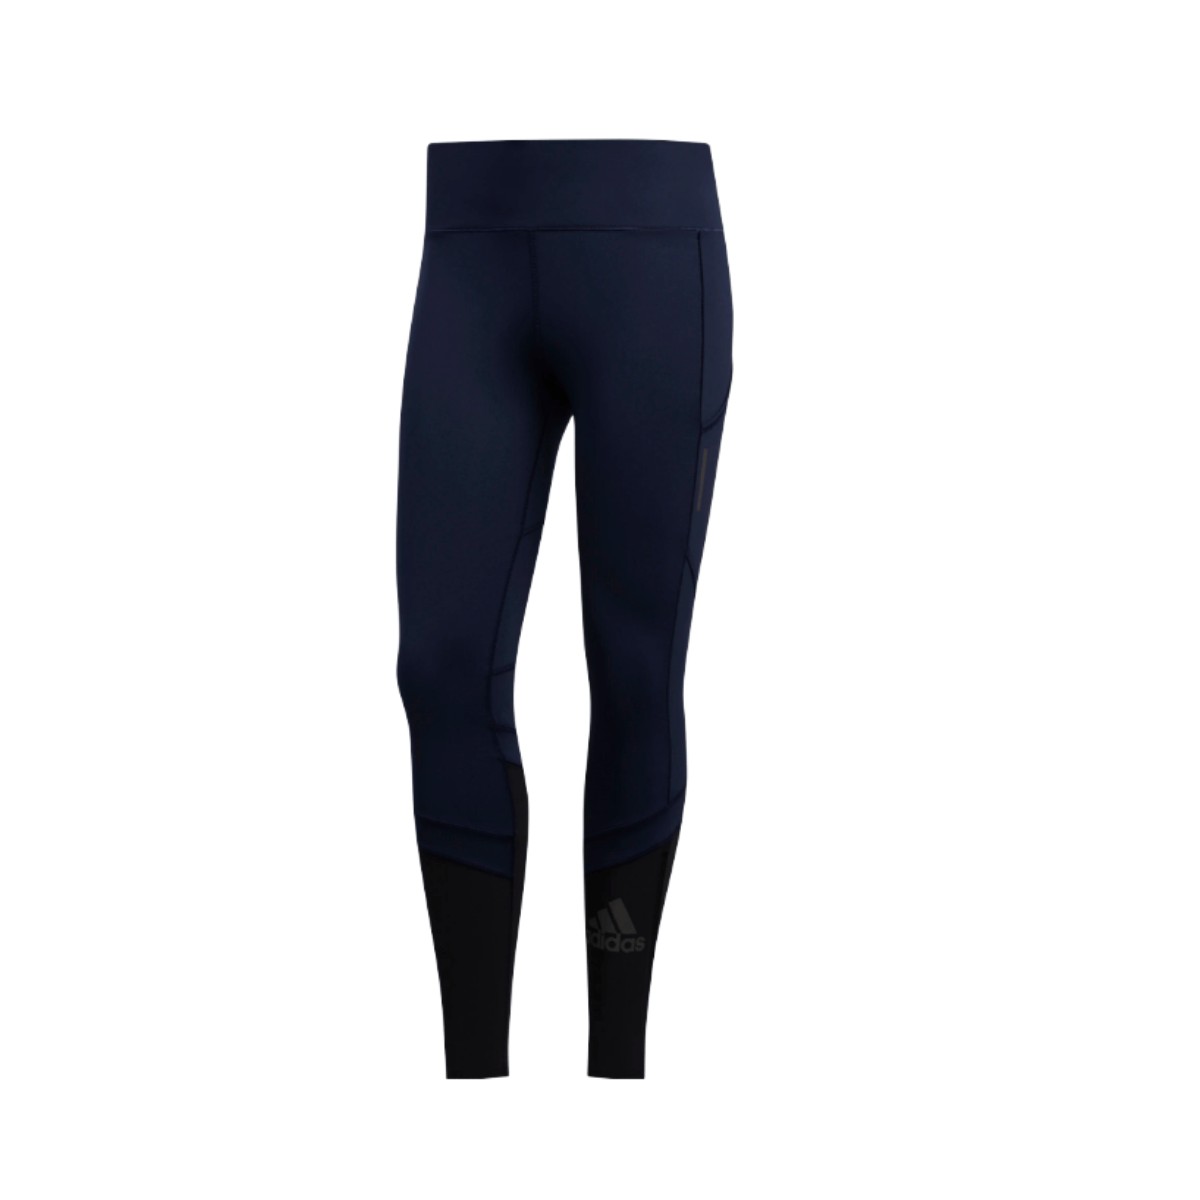 Adidas How We Go Tight Blue Black Women Tights, Size L